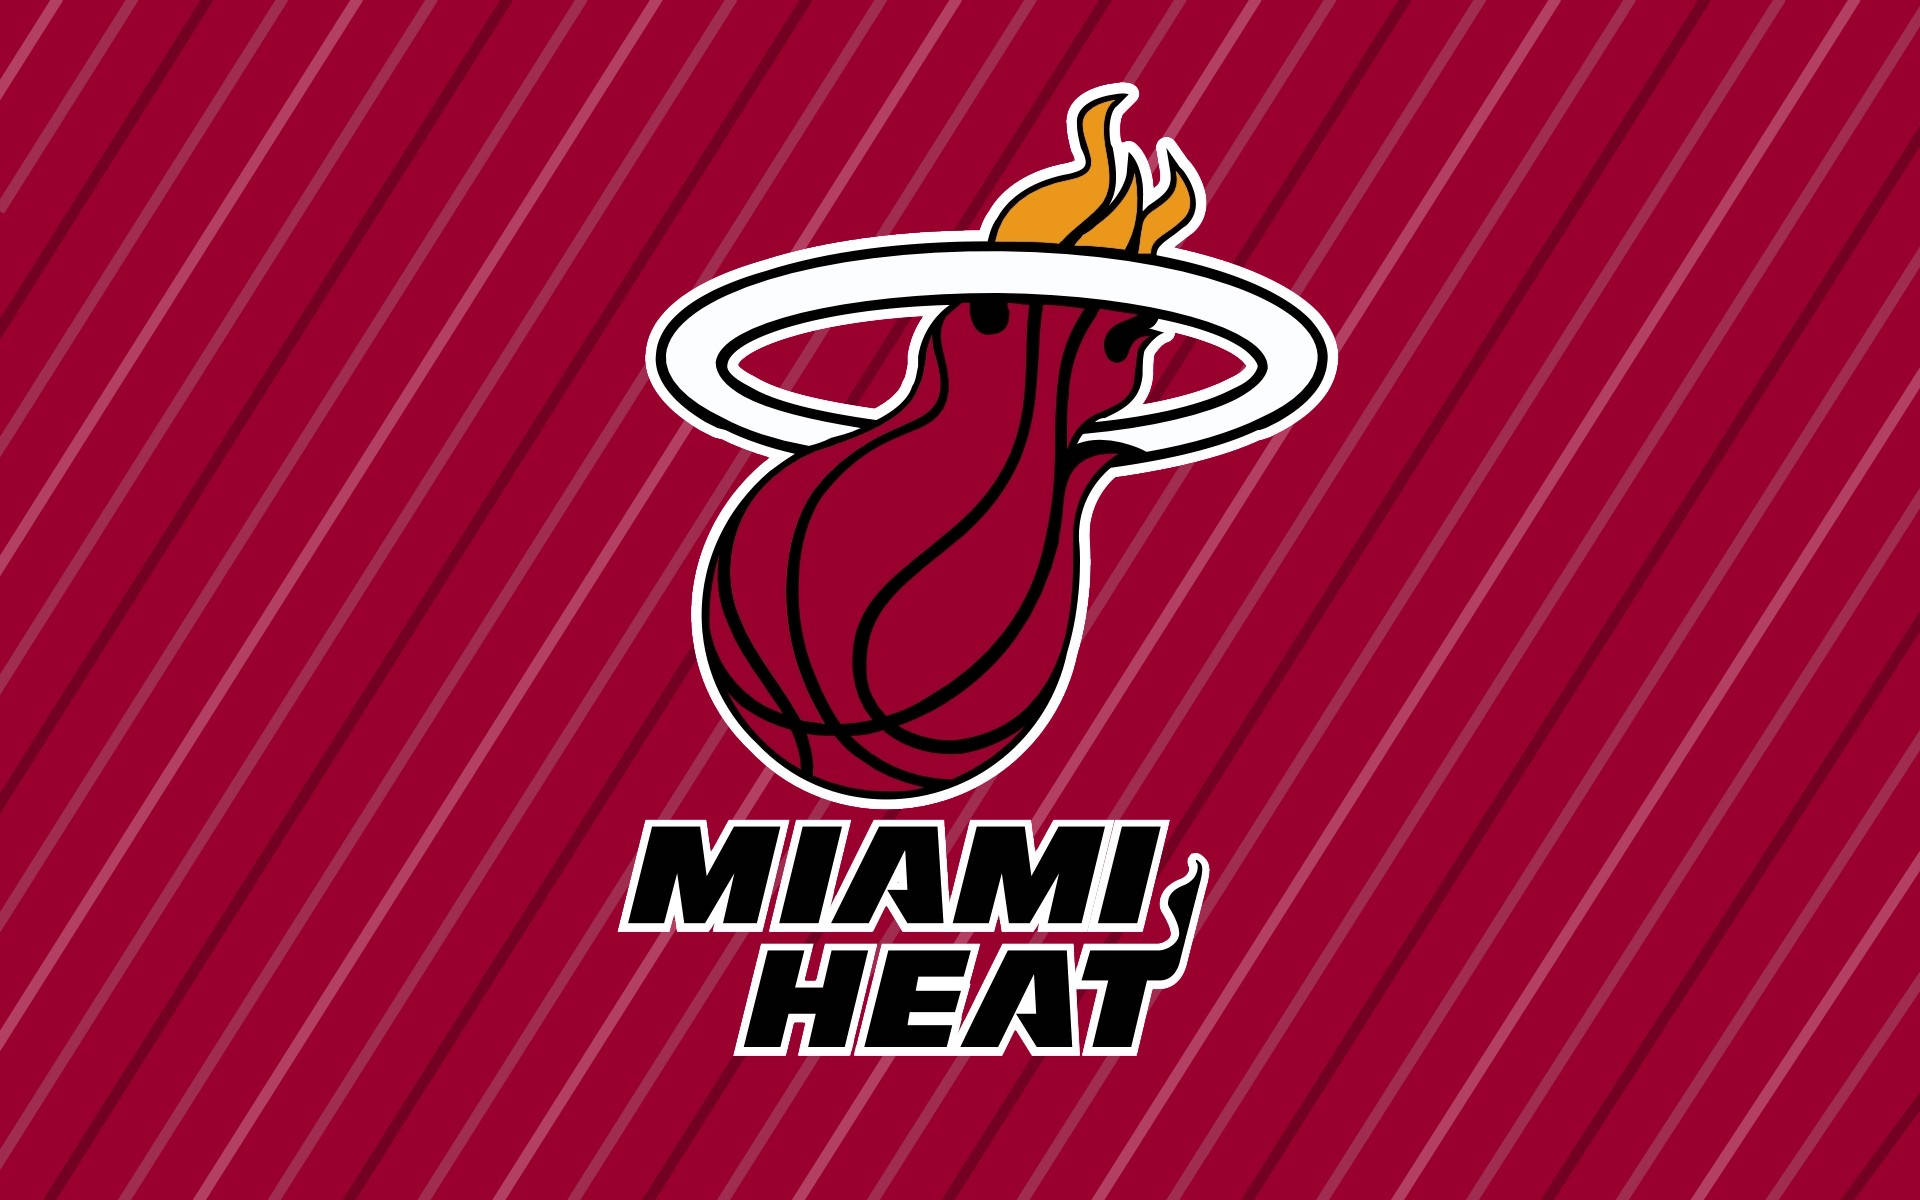 Miami Heat Red Poster Background